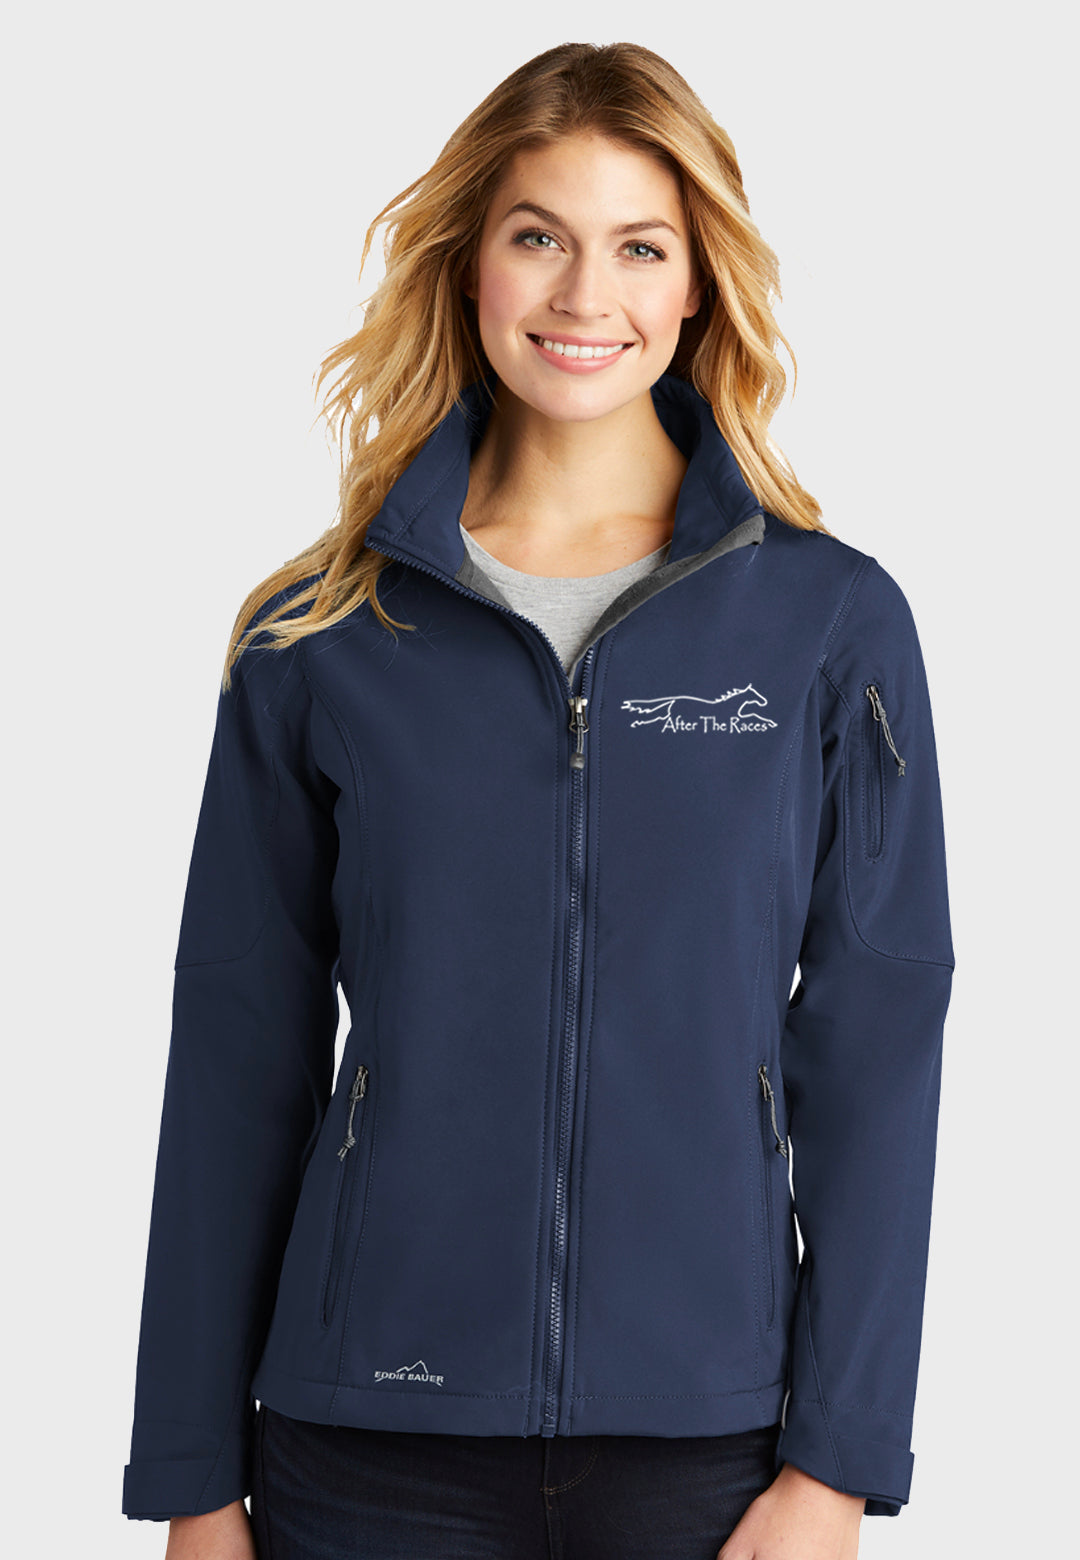 After the Races Ladies Eddie Bauer® Soft Shell Jacket - 2 Color Options